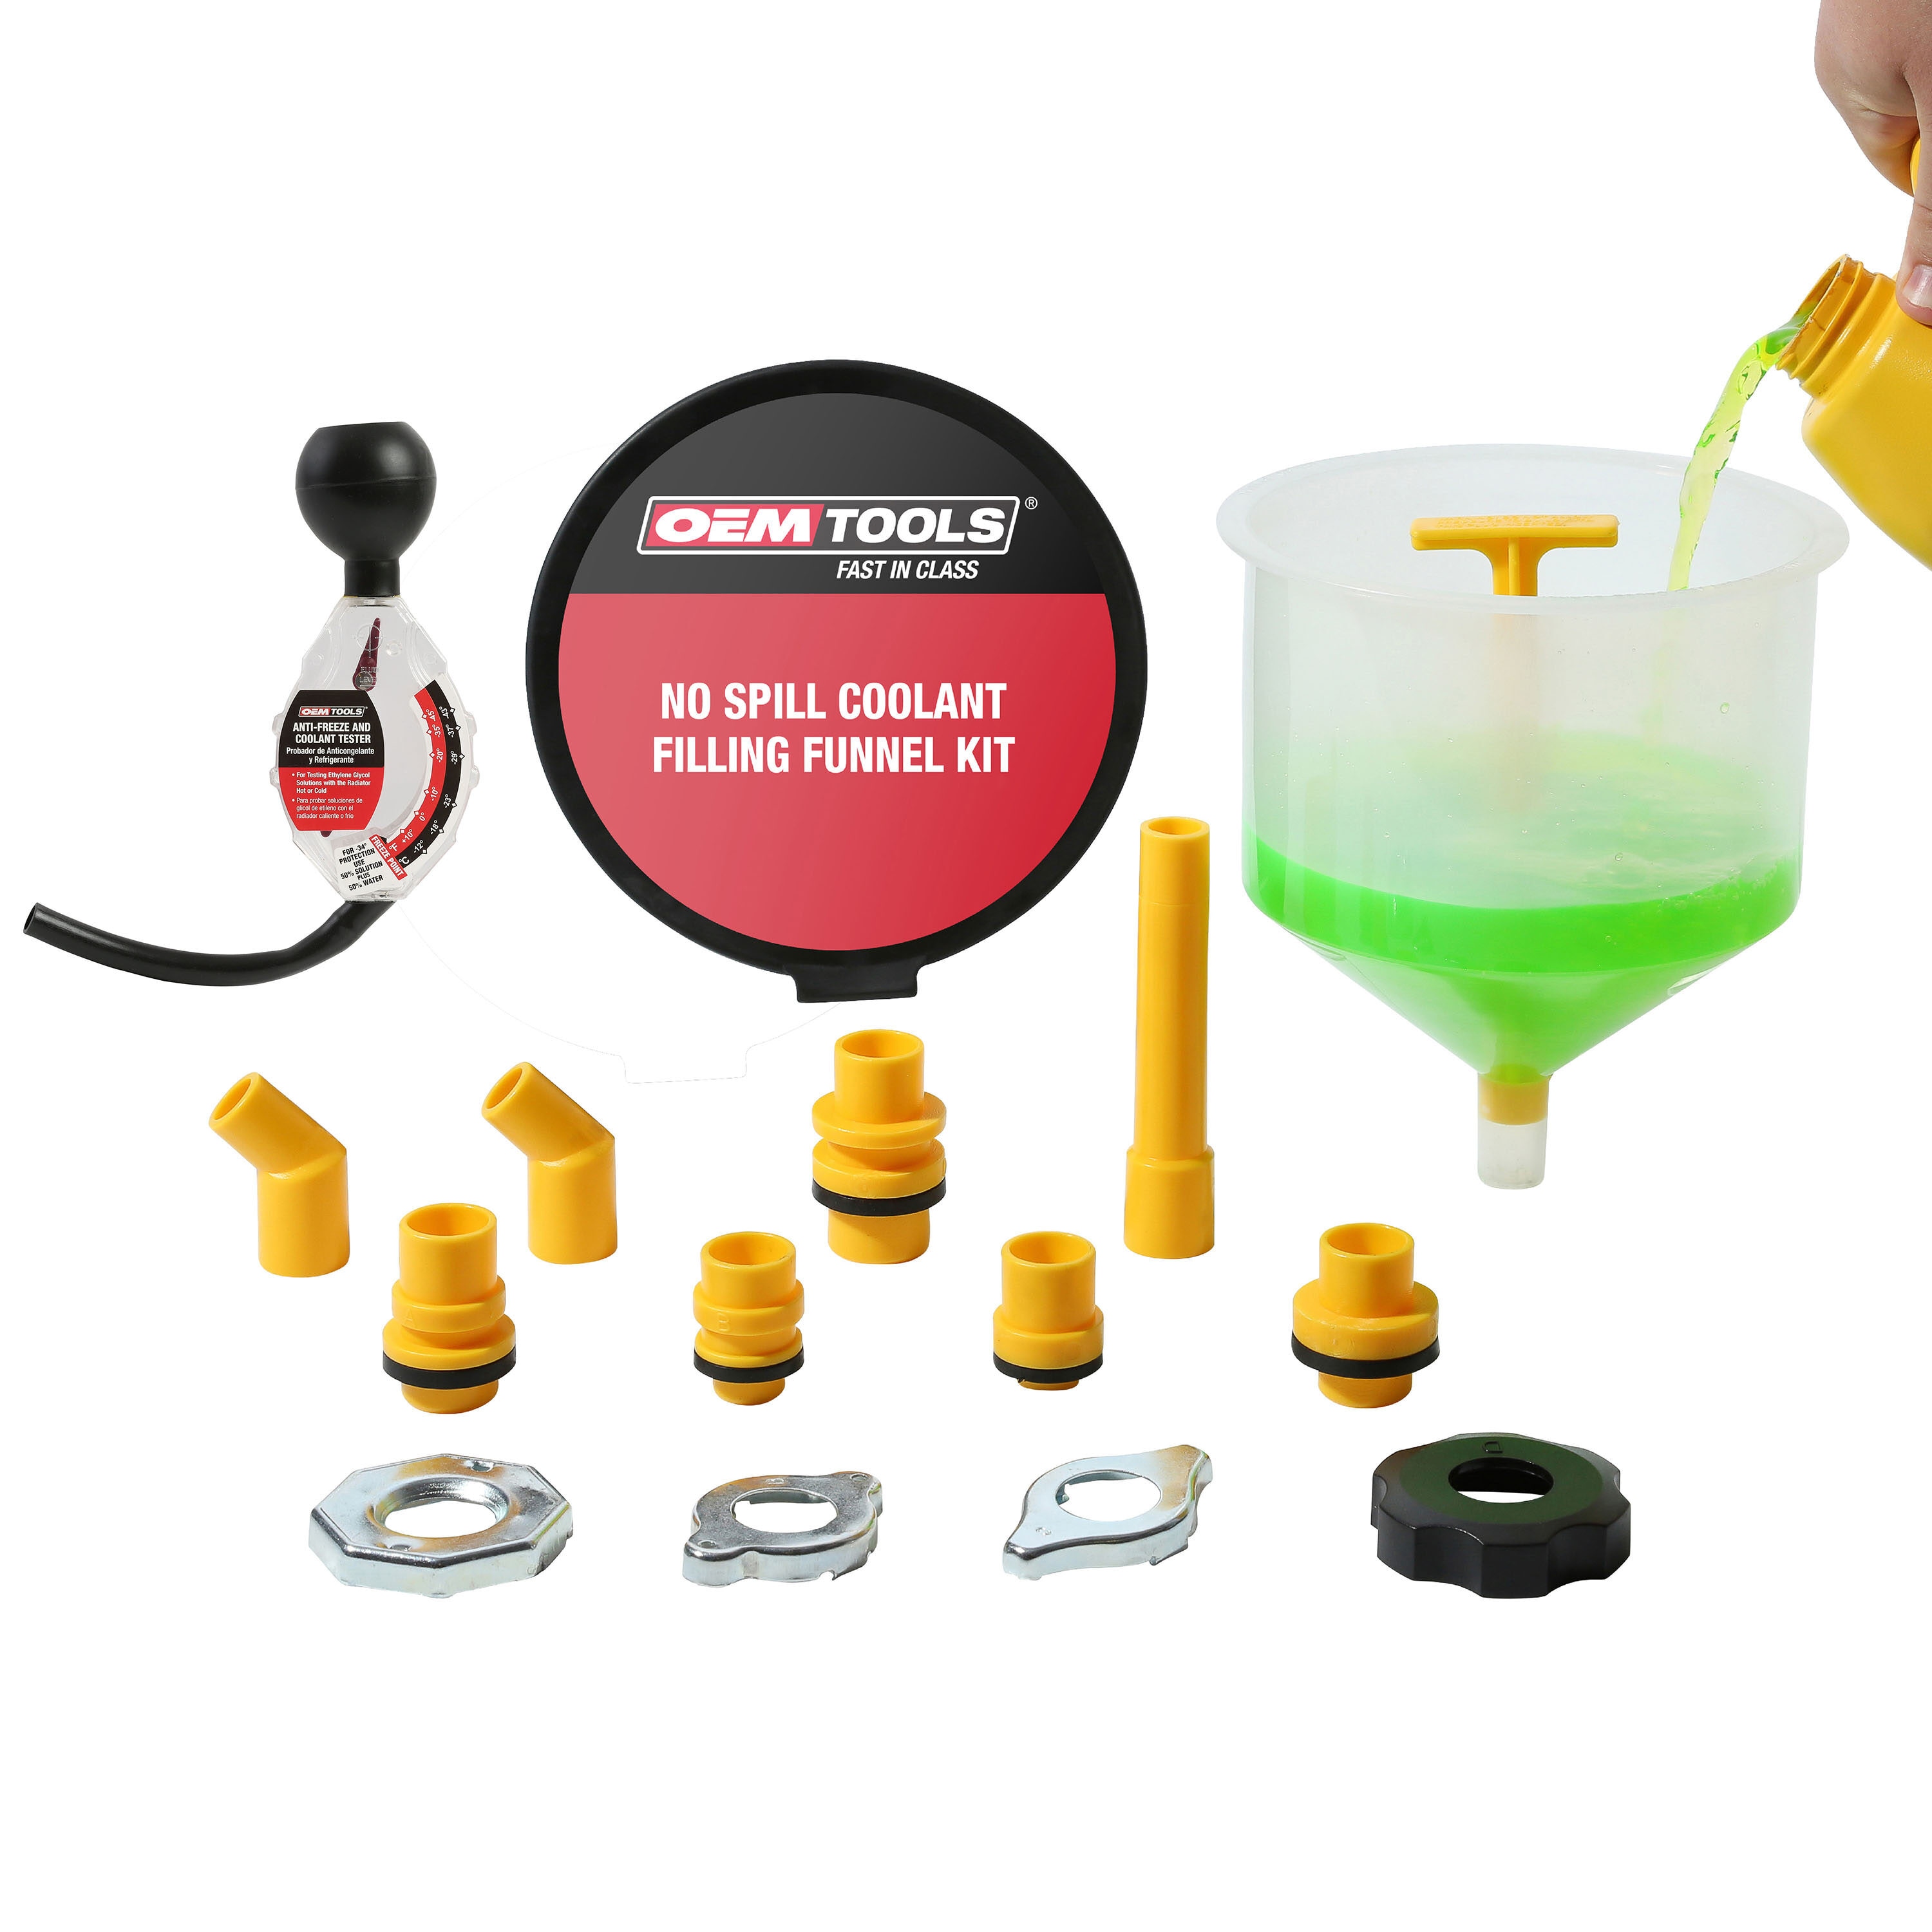 OEM OEMTOOLS 87045 No Spill Coolant Filling Funnel Kit with